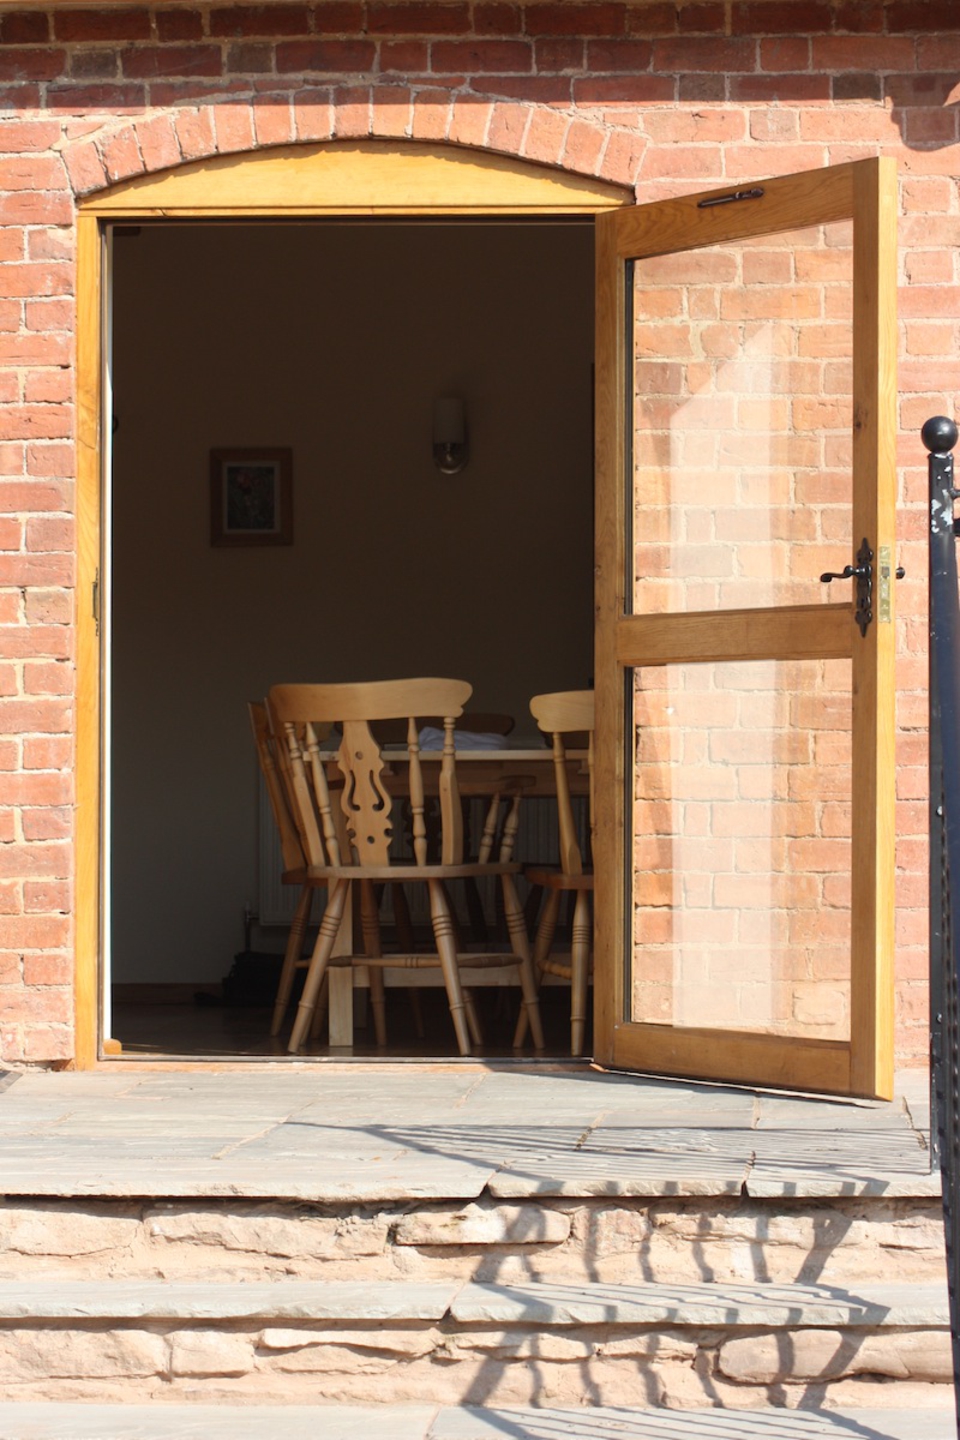 The lounge/dining room door leads straight out onto a sunny patio